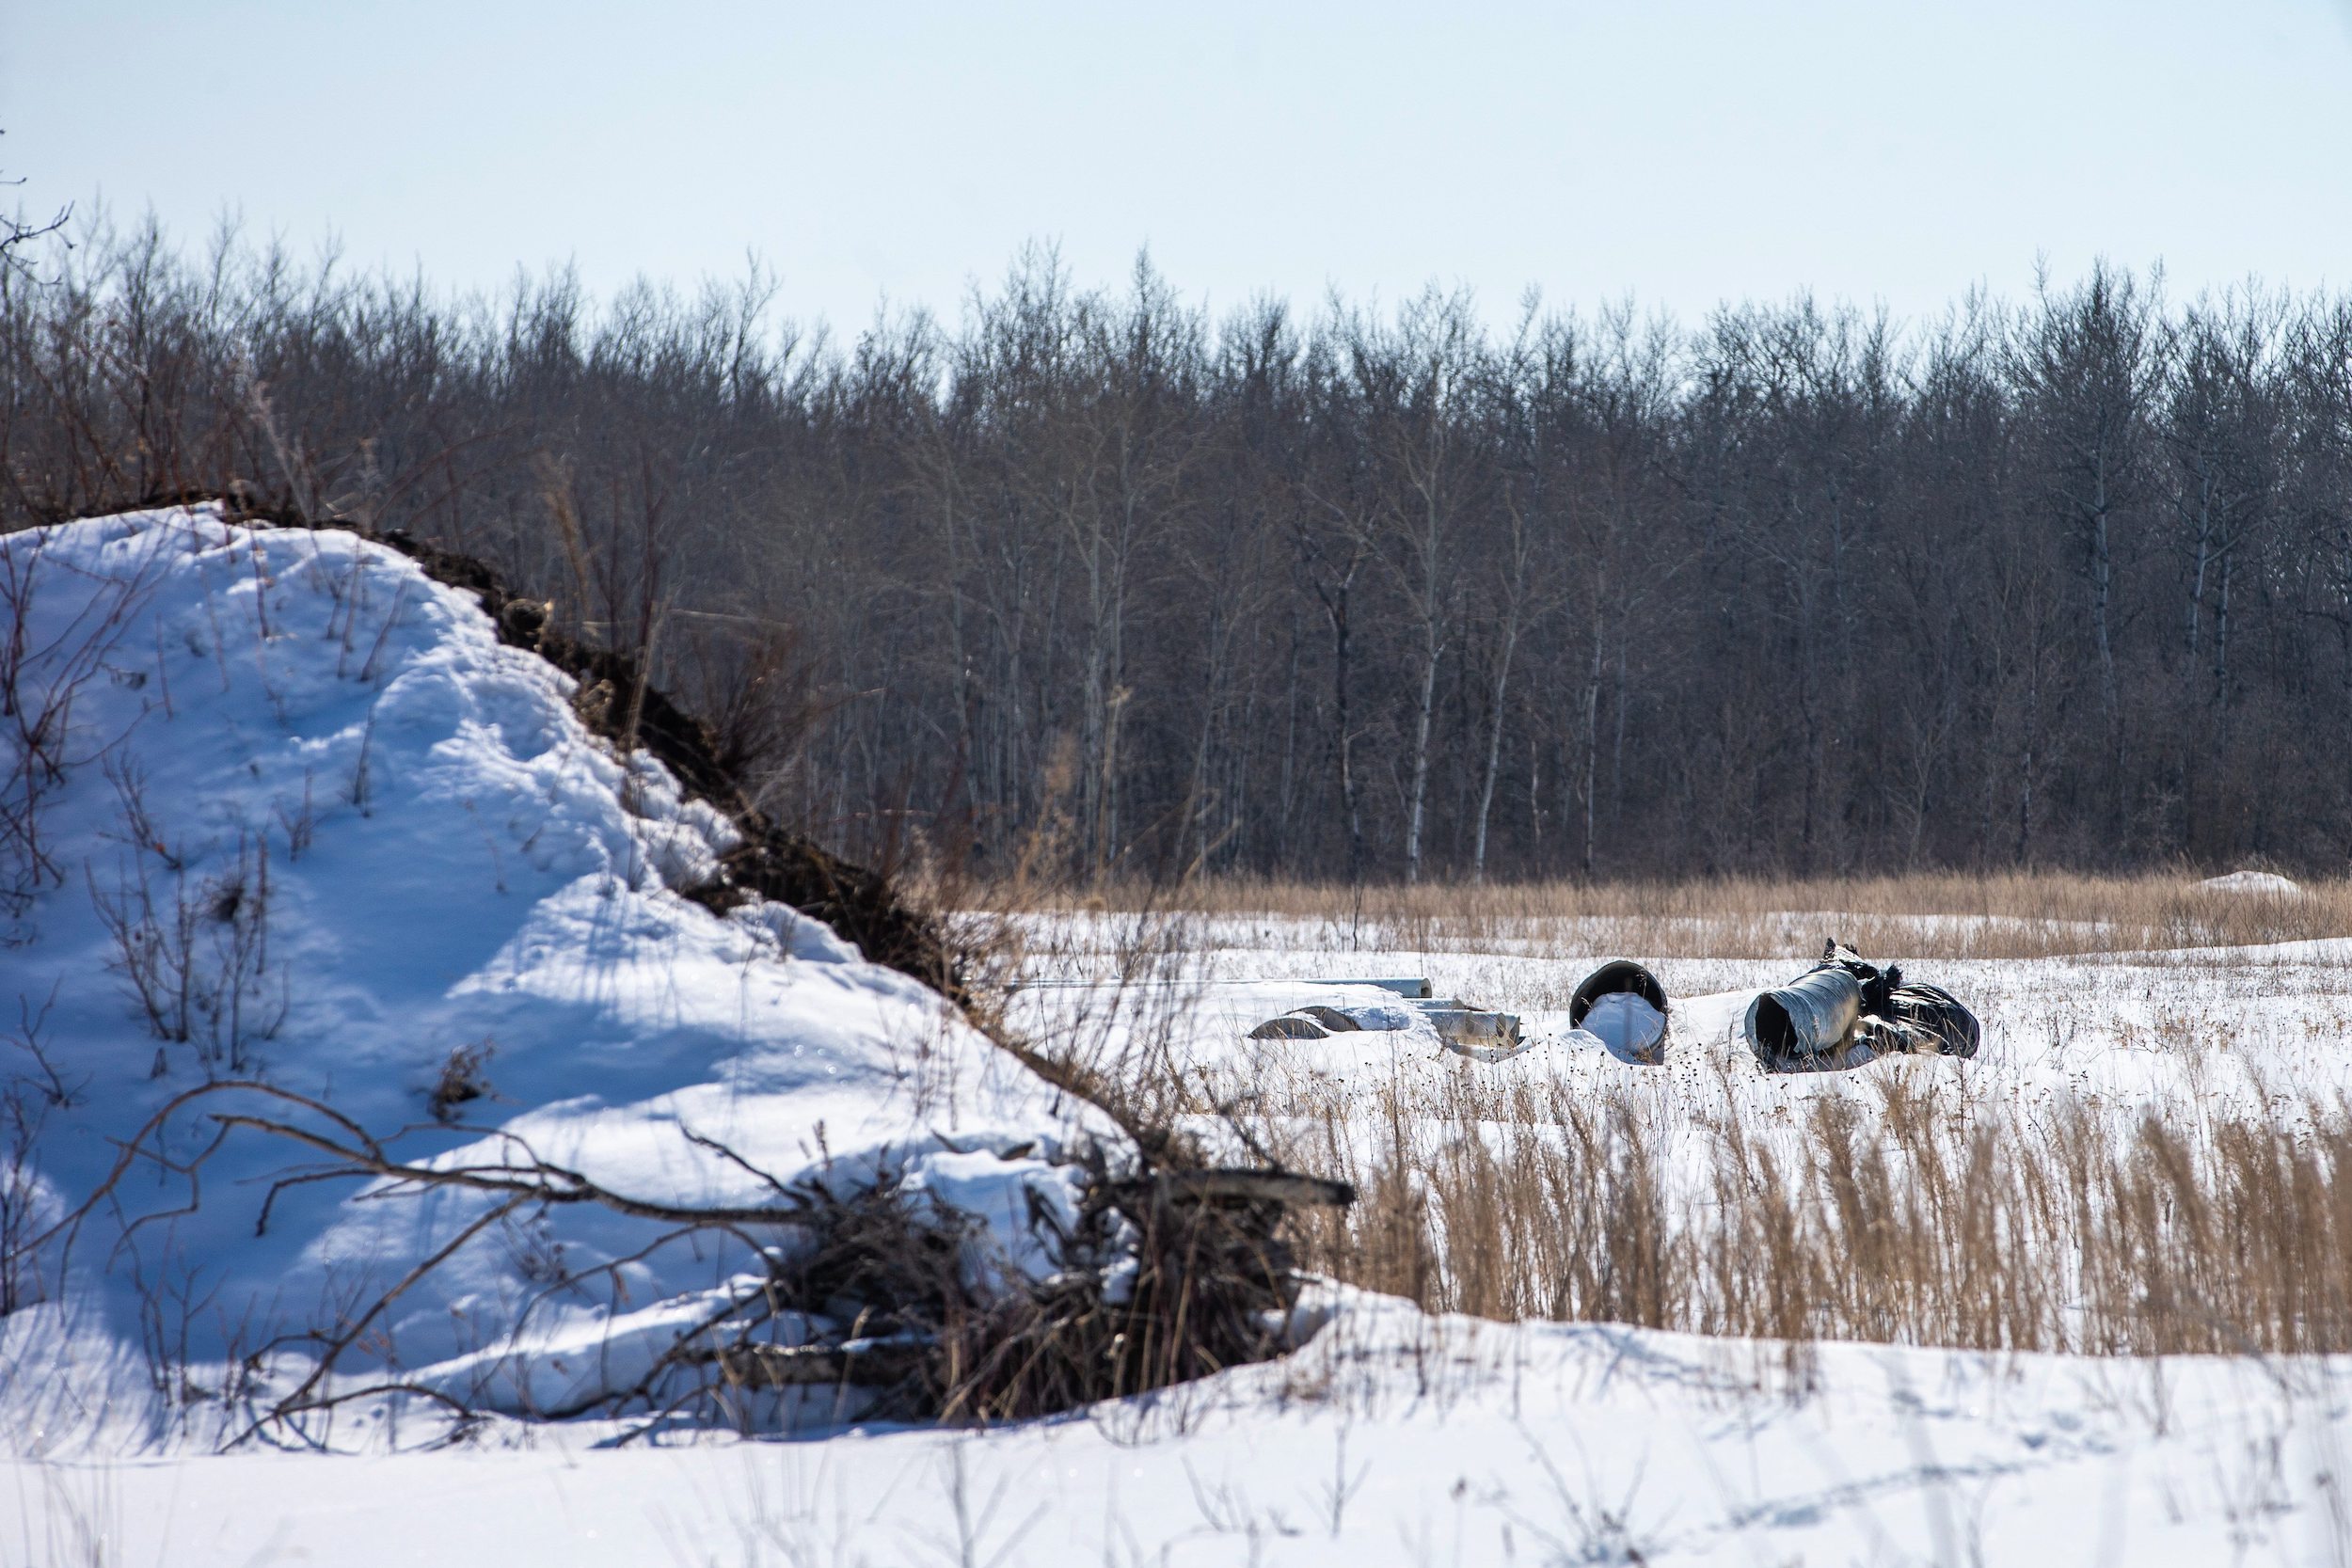 Construction debris lies behind a pile of dirt and snow on the clear-cut land behind the Mustard family's property, where a mining company plans to build a sand processing facility